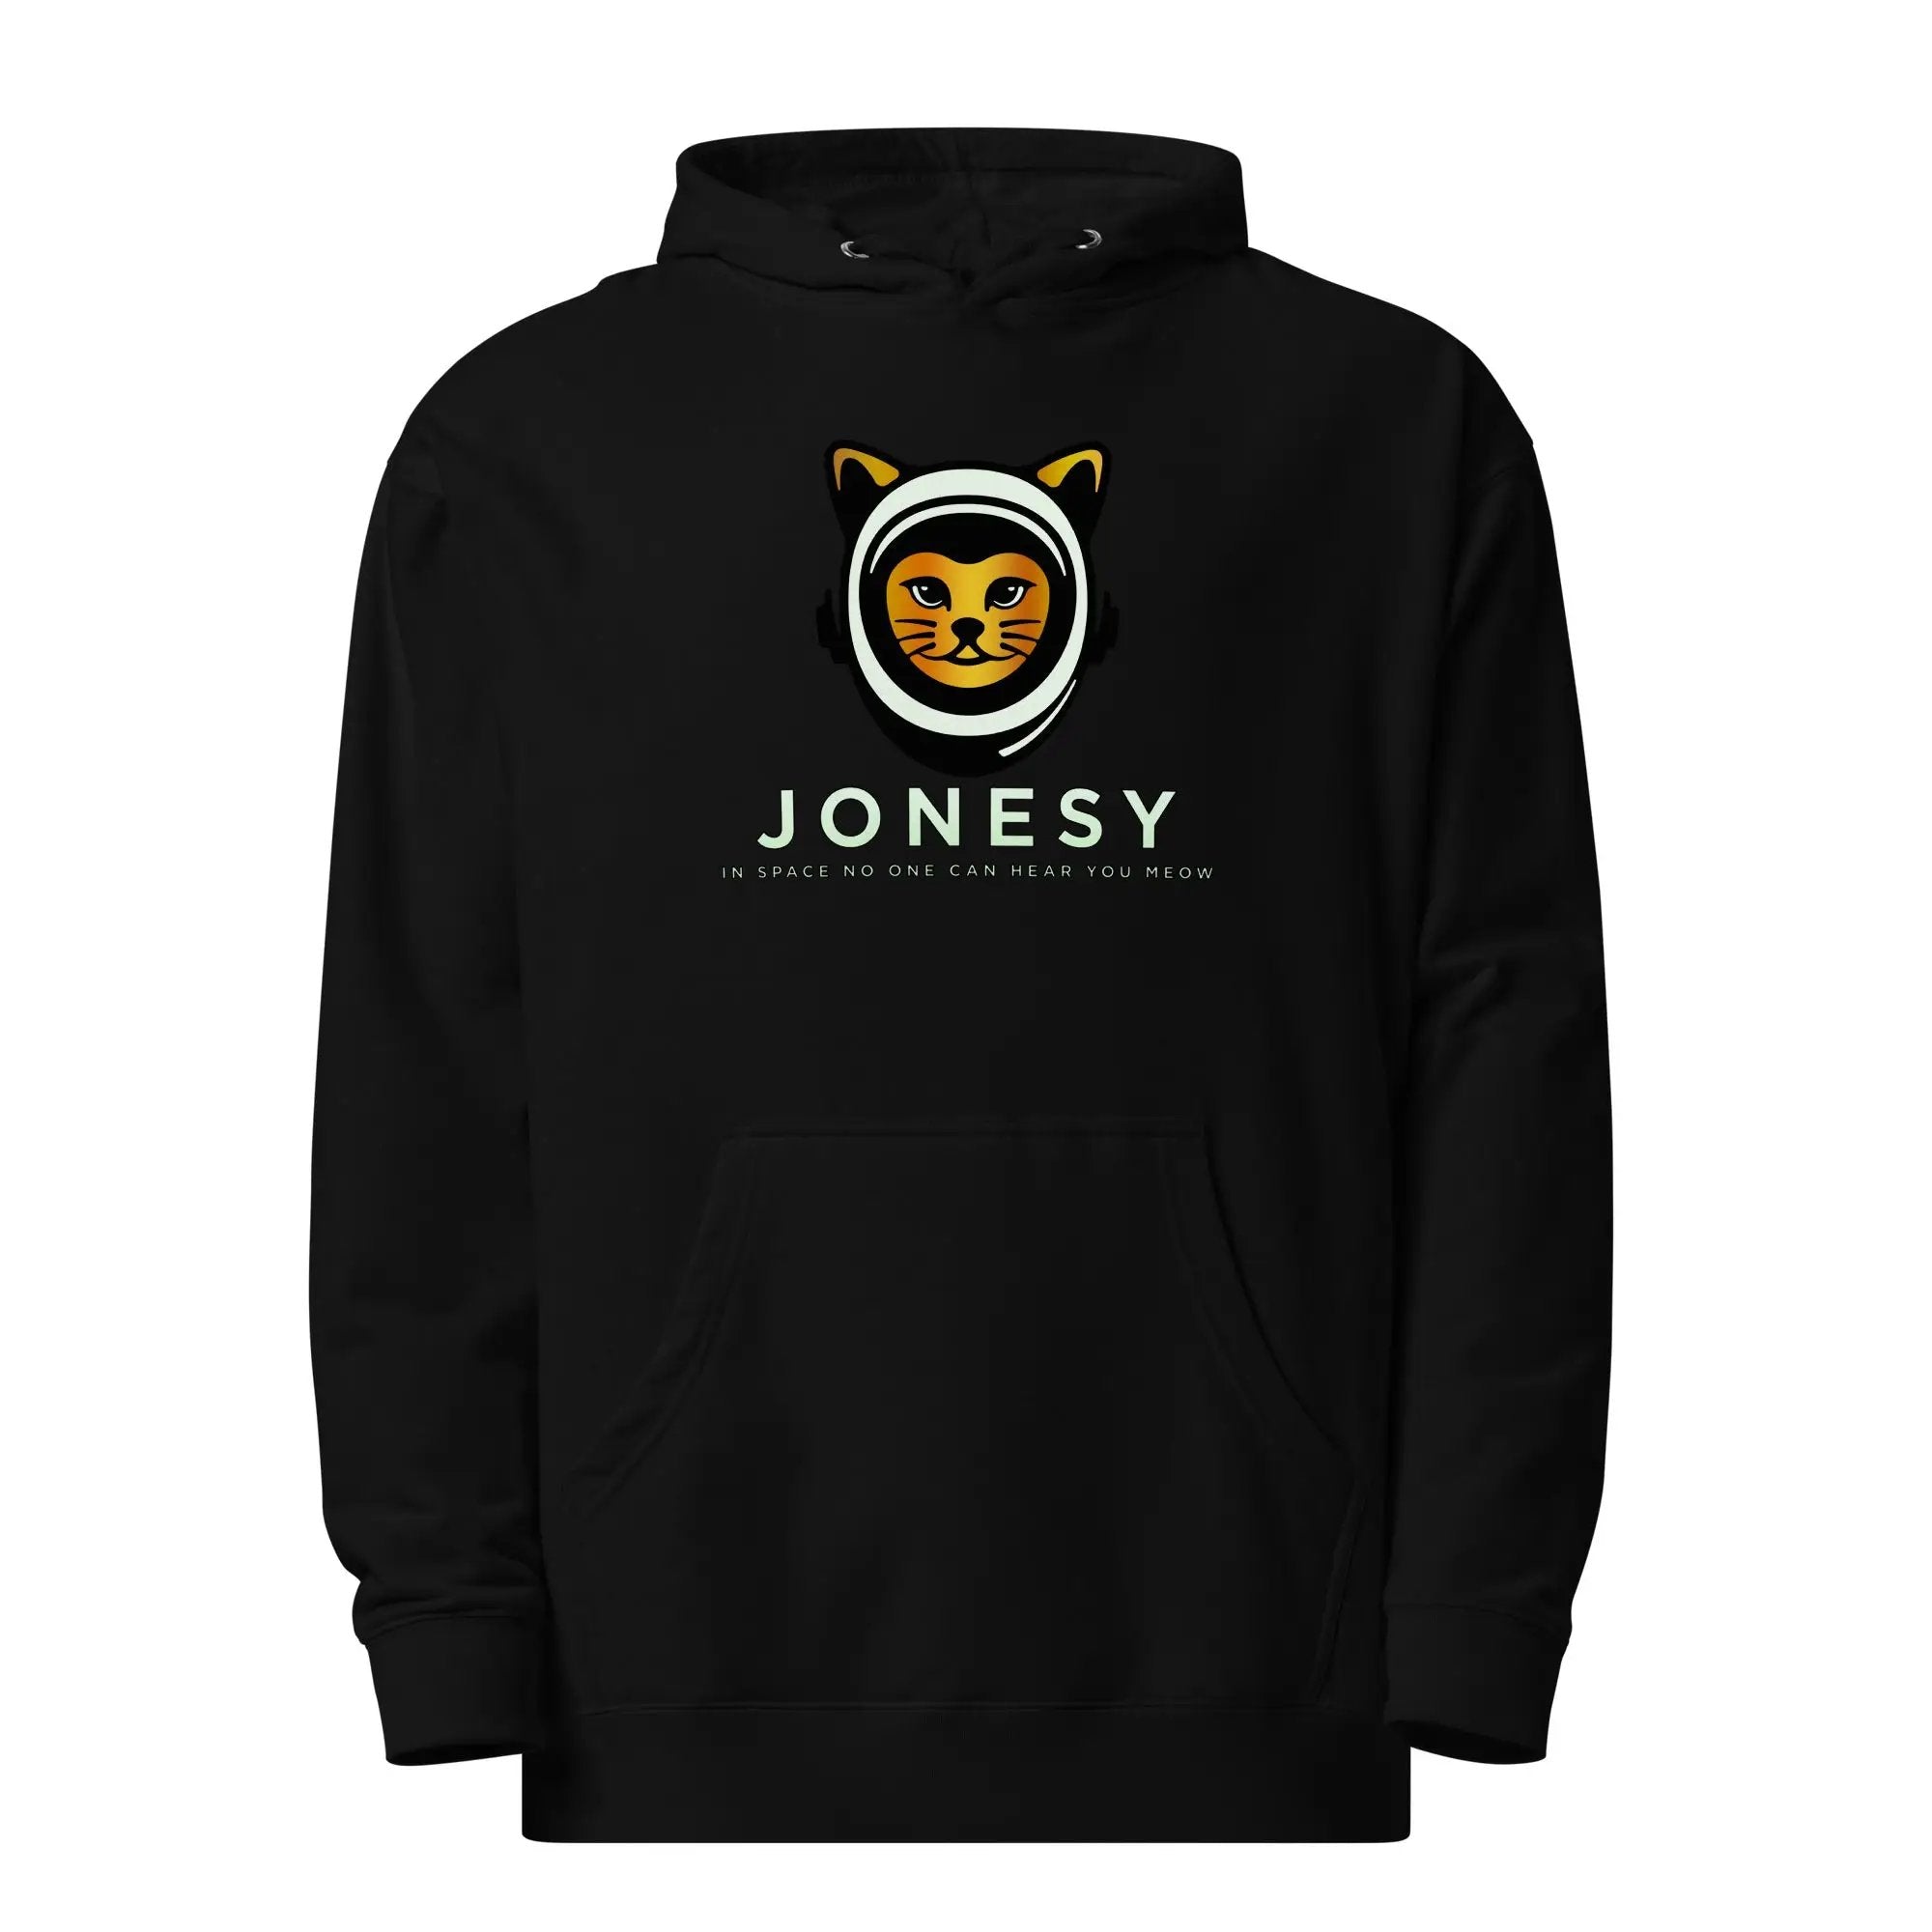 a black hoodie with an image of a monkey on it